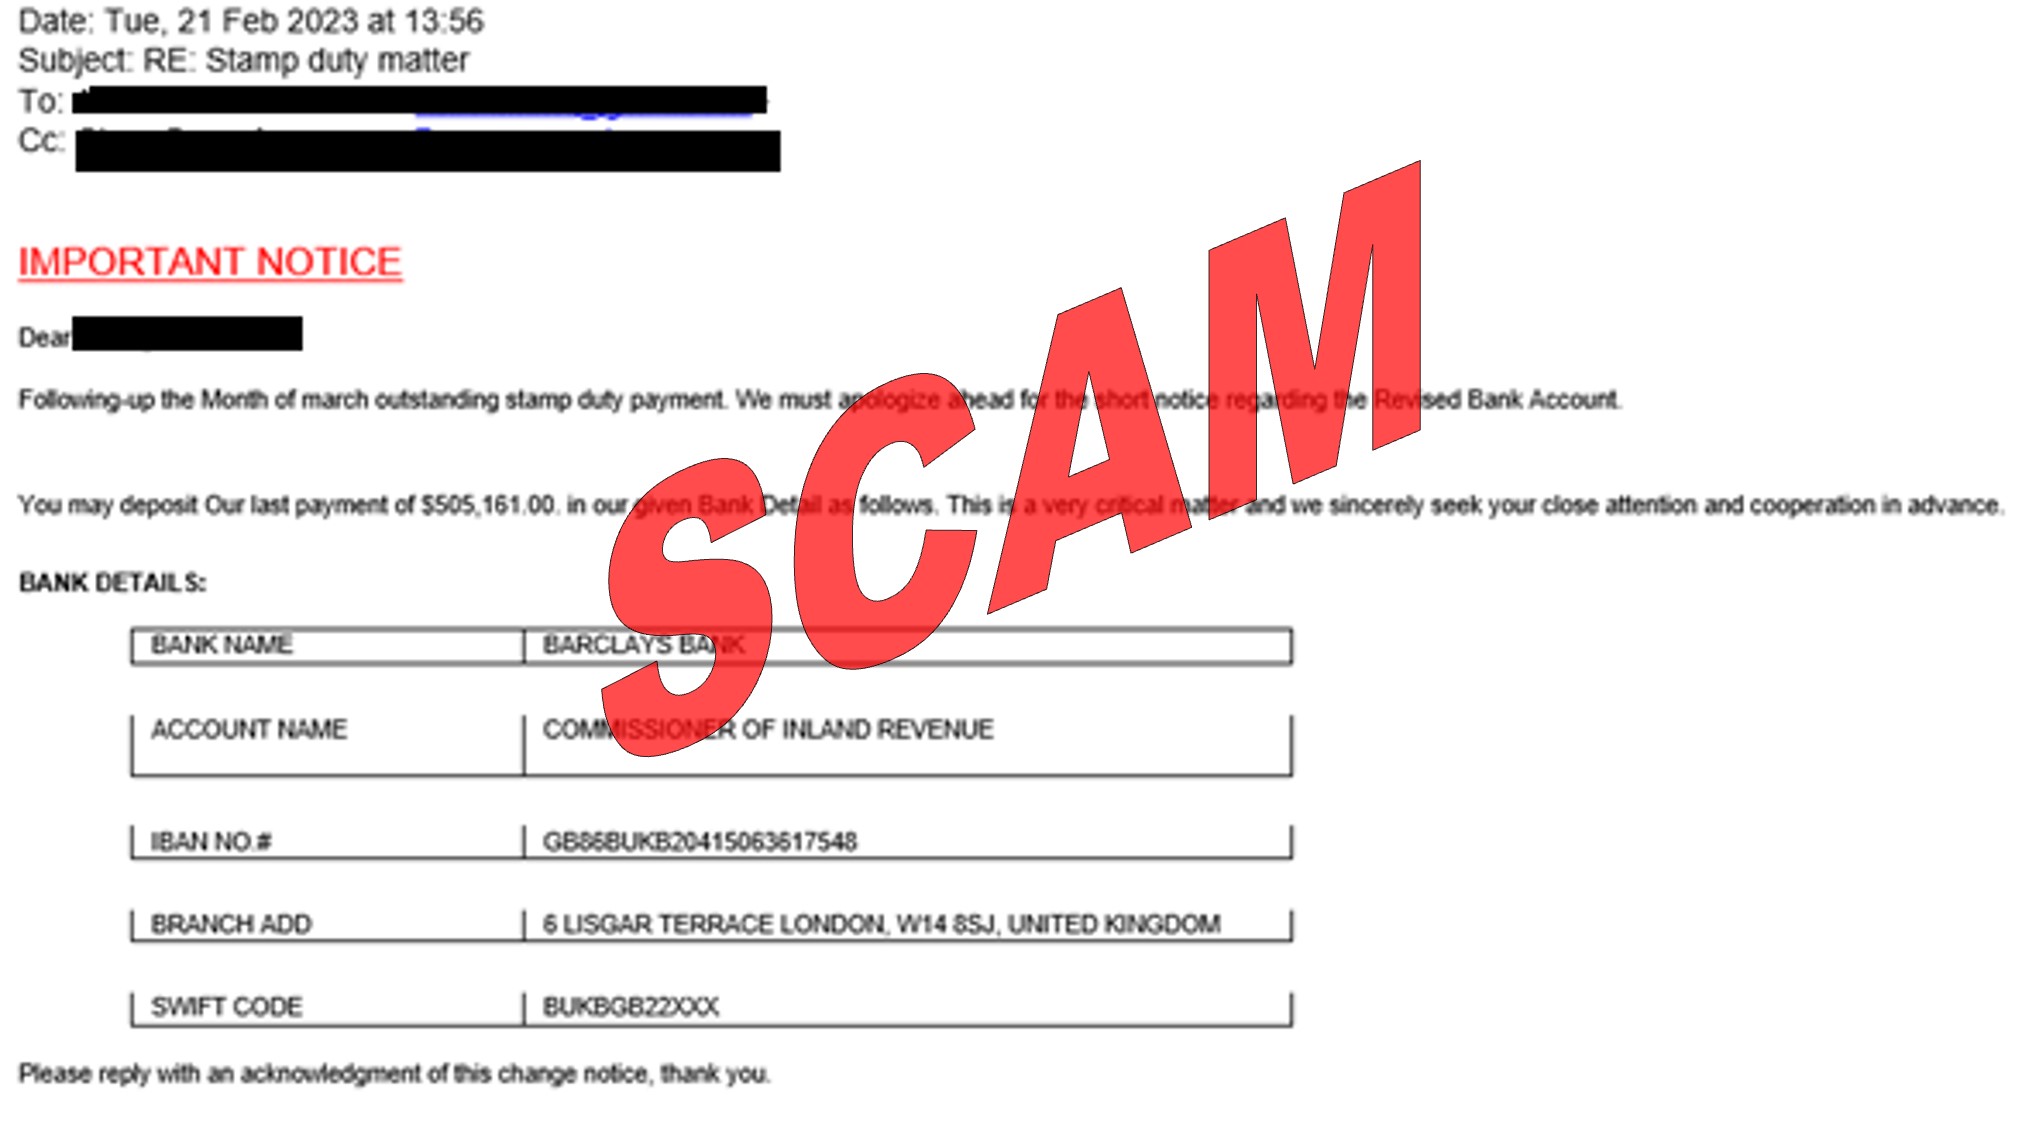 Screenshot of scam email seeking deposit payment on outstanding stamp duty payment_21Feb2023